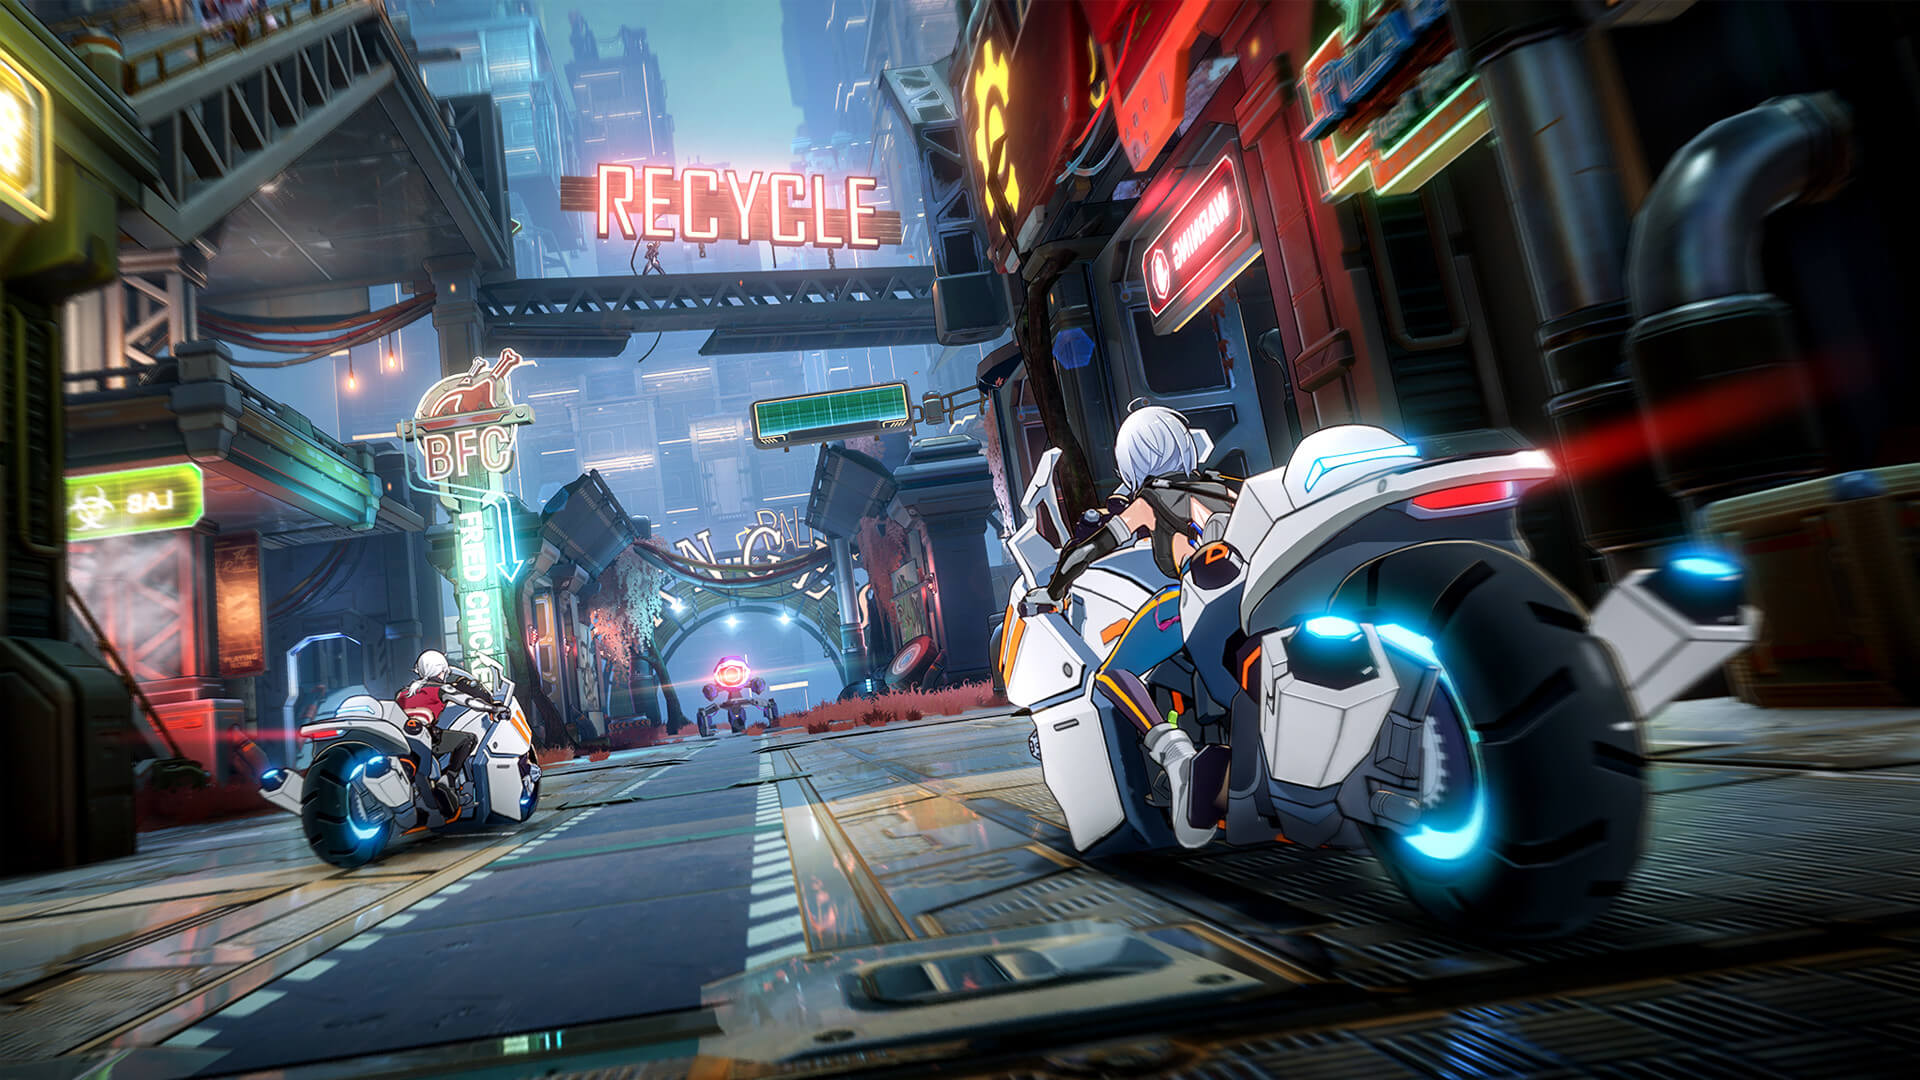 Two characters riding bikes through a cyberpunk city in Tower of Fantasy